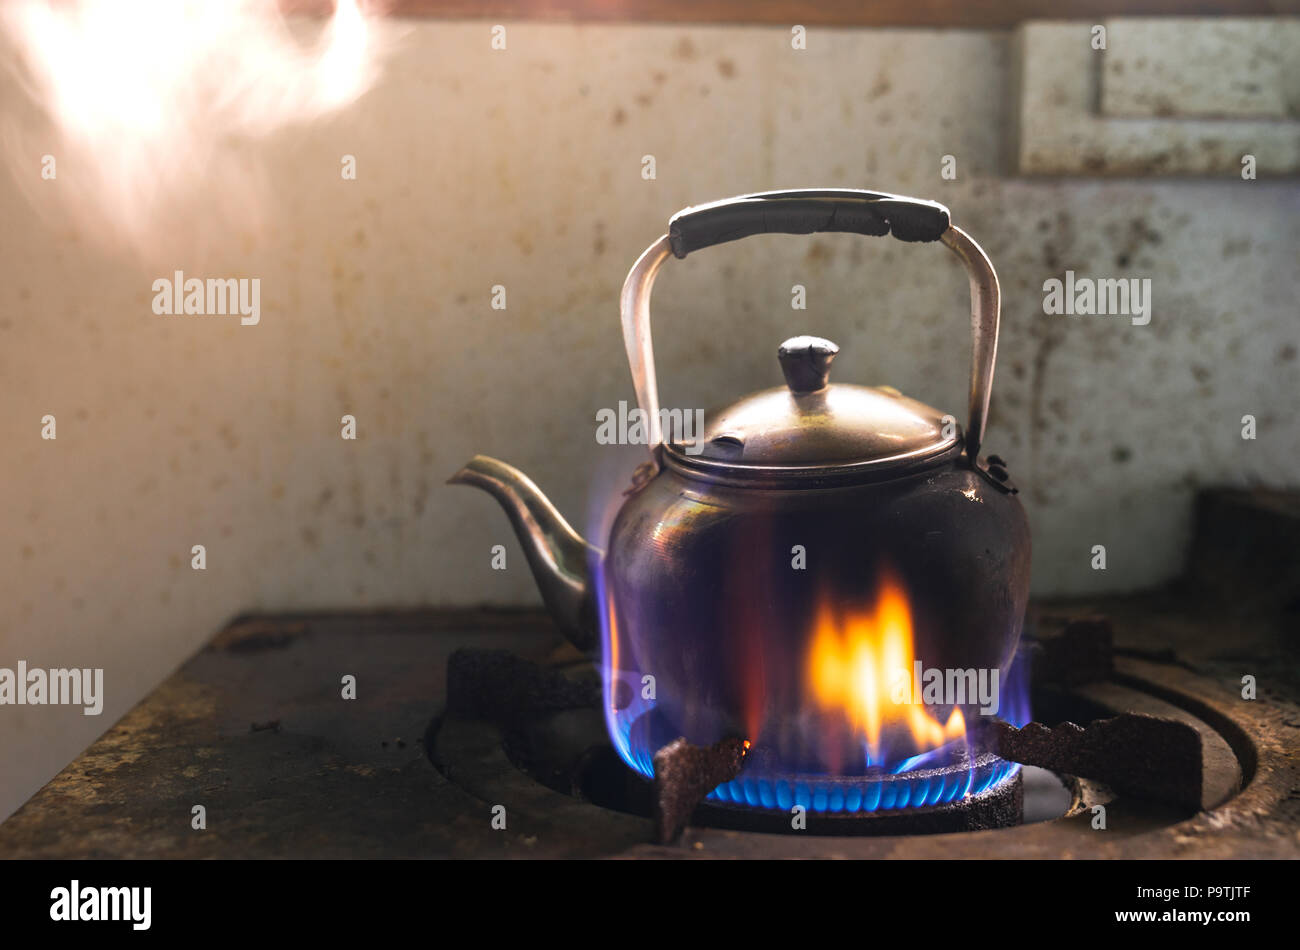 Kettle Boiling Water Kettle Boils Gas Stove Kettle Whistles Gas Stock Photo  by ©pit84@bk.ru 254008860